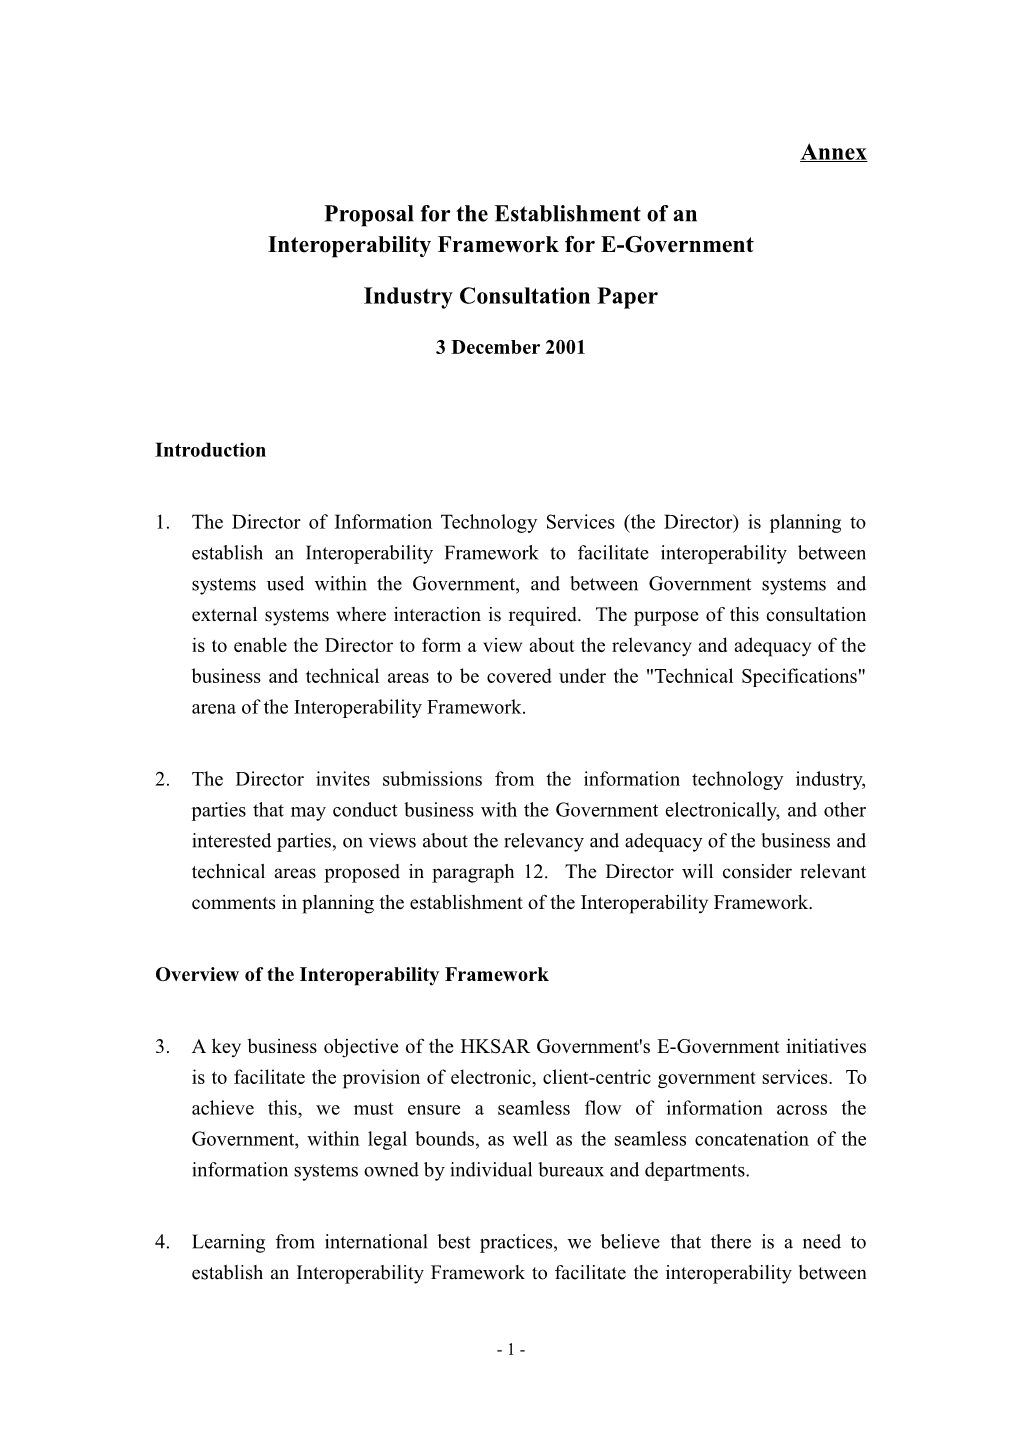 Proposal for the Establishment of an Interoperability Framework for E-Government Industry